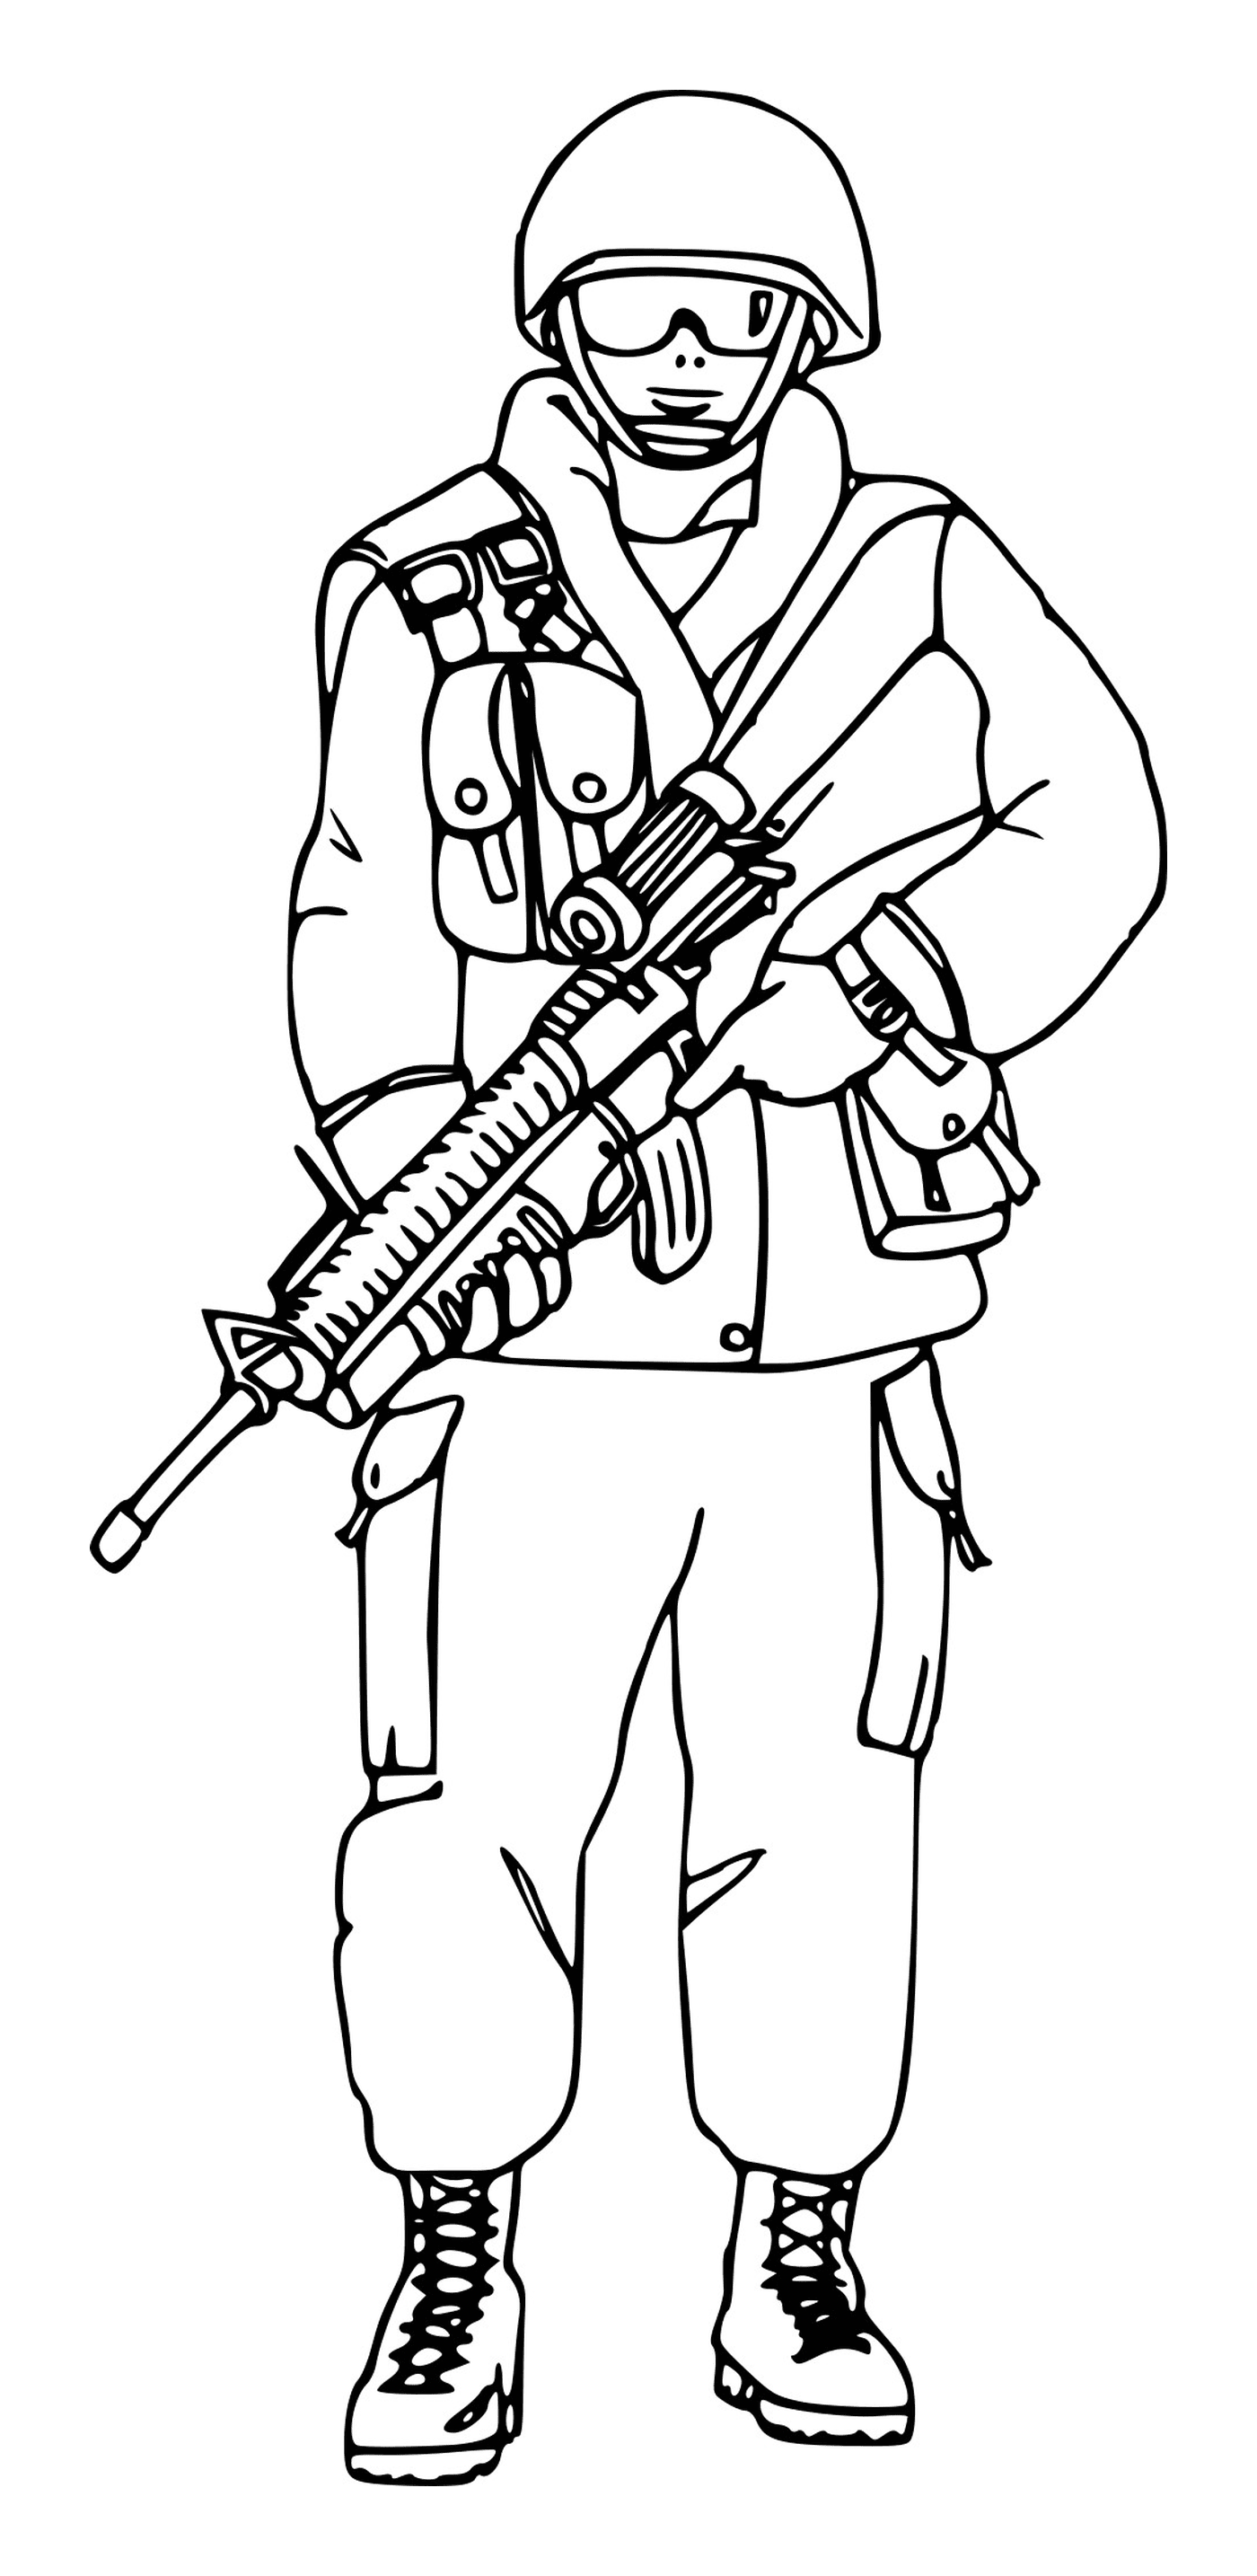  Soldier with glasses: a soldier holding a rifle 